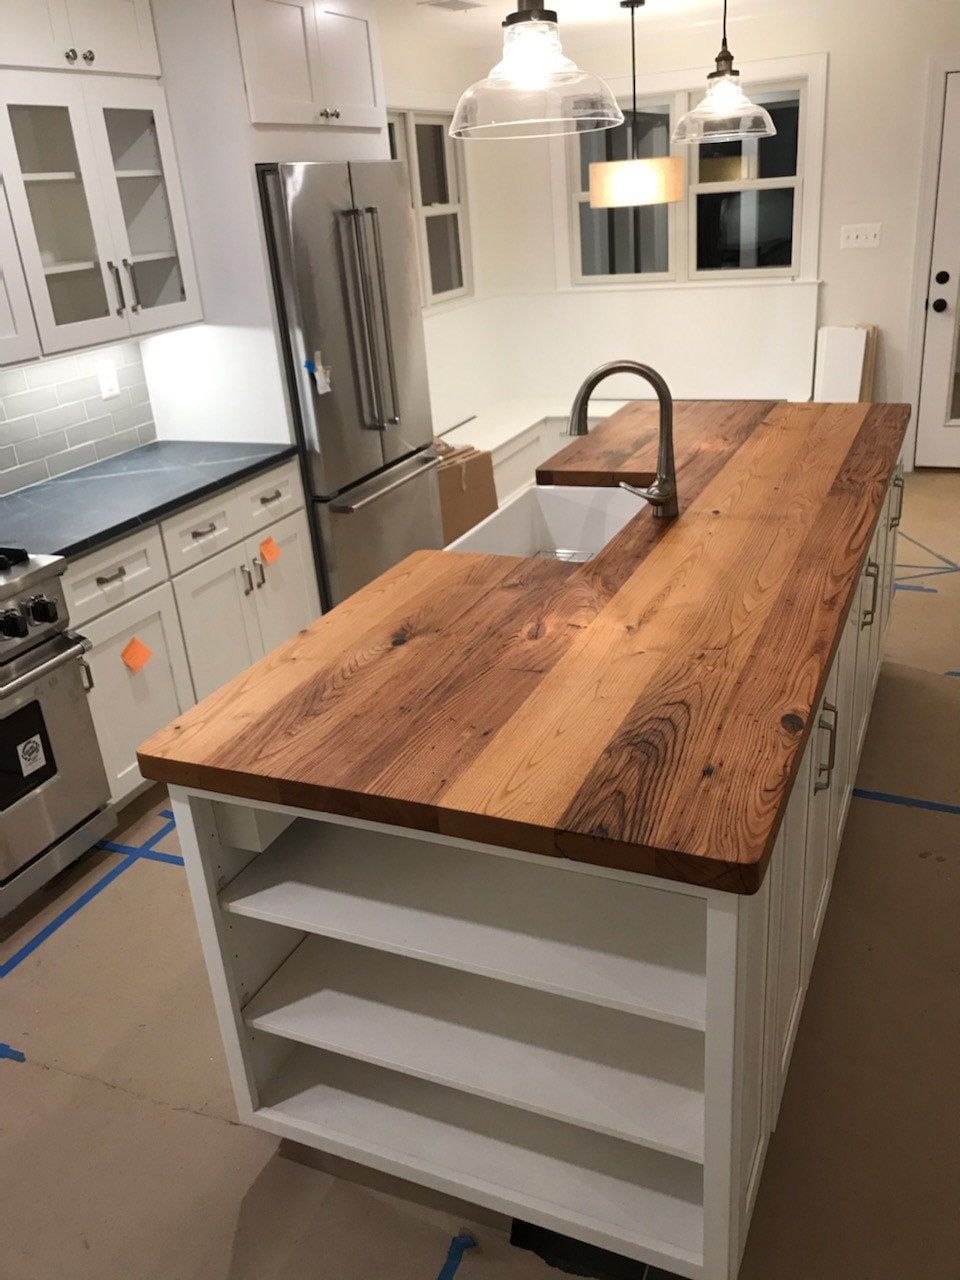 Transform Your Kitchen with a Stylish Butcher Block Island Countertop